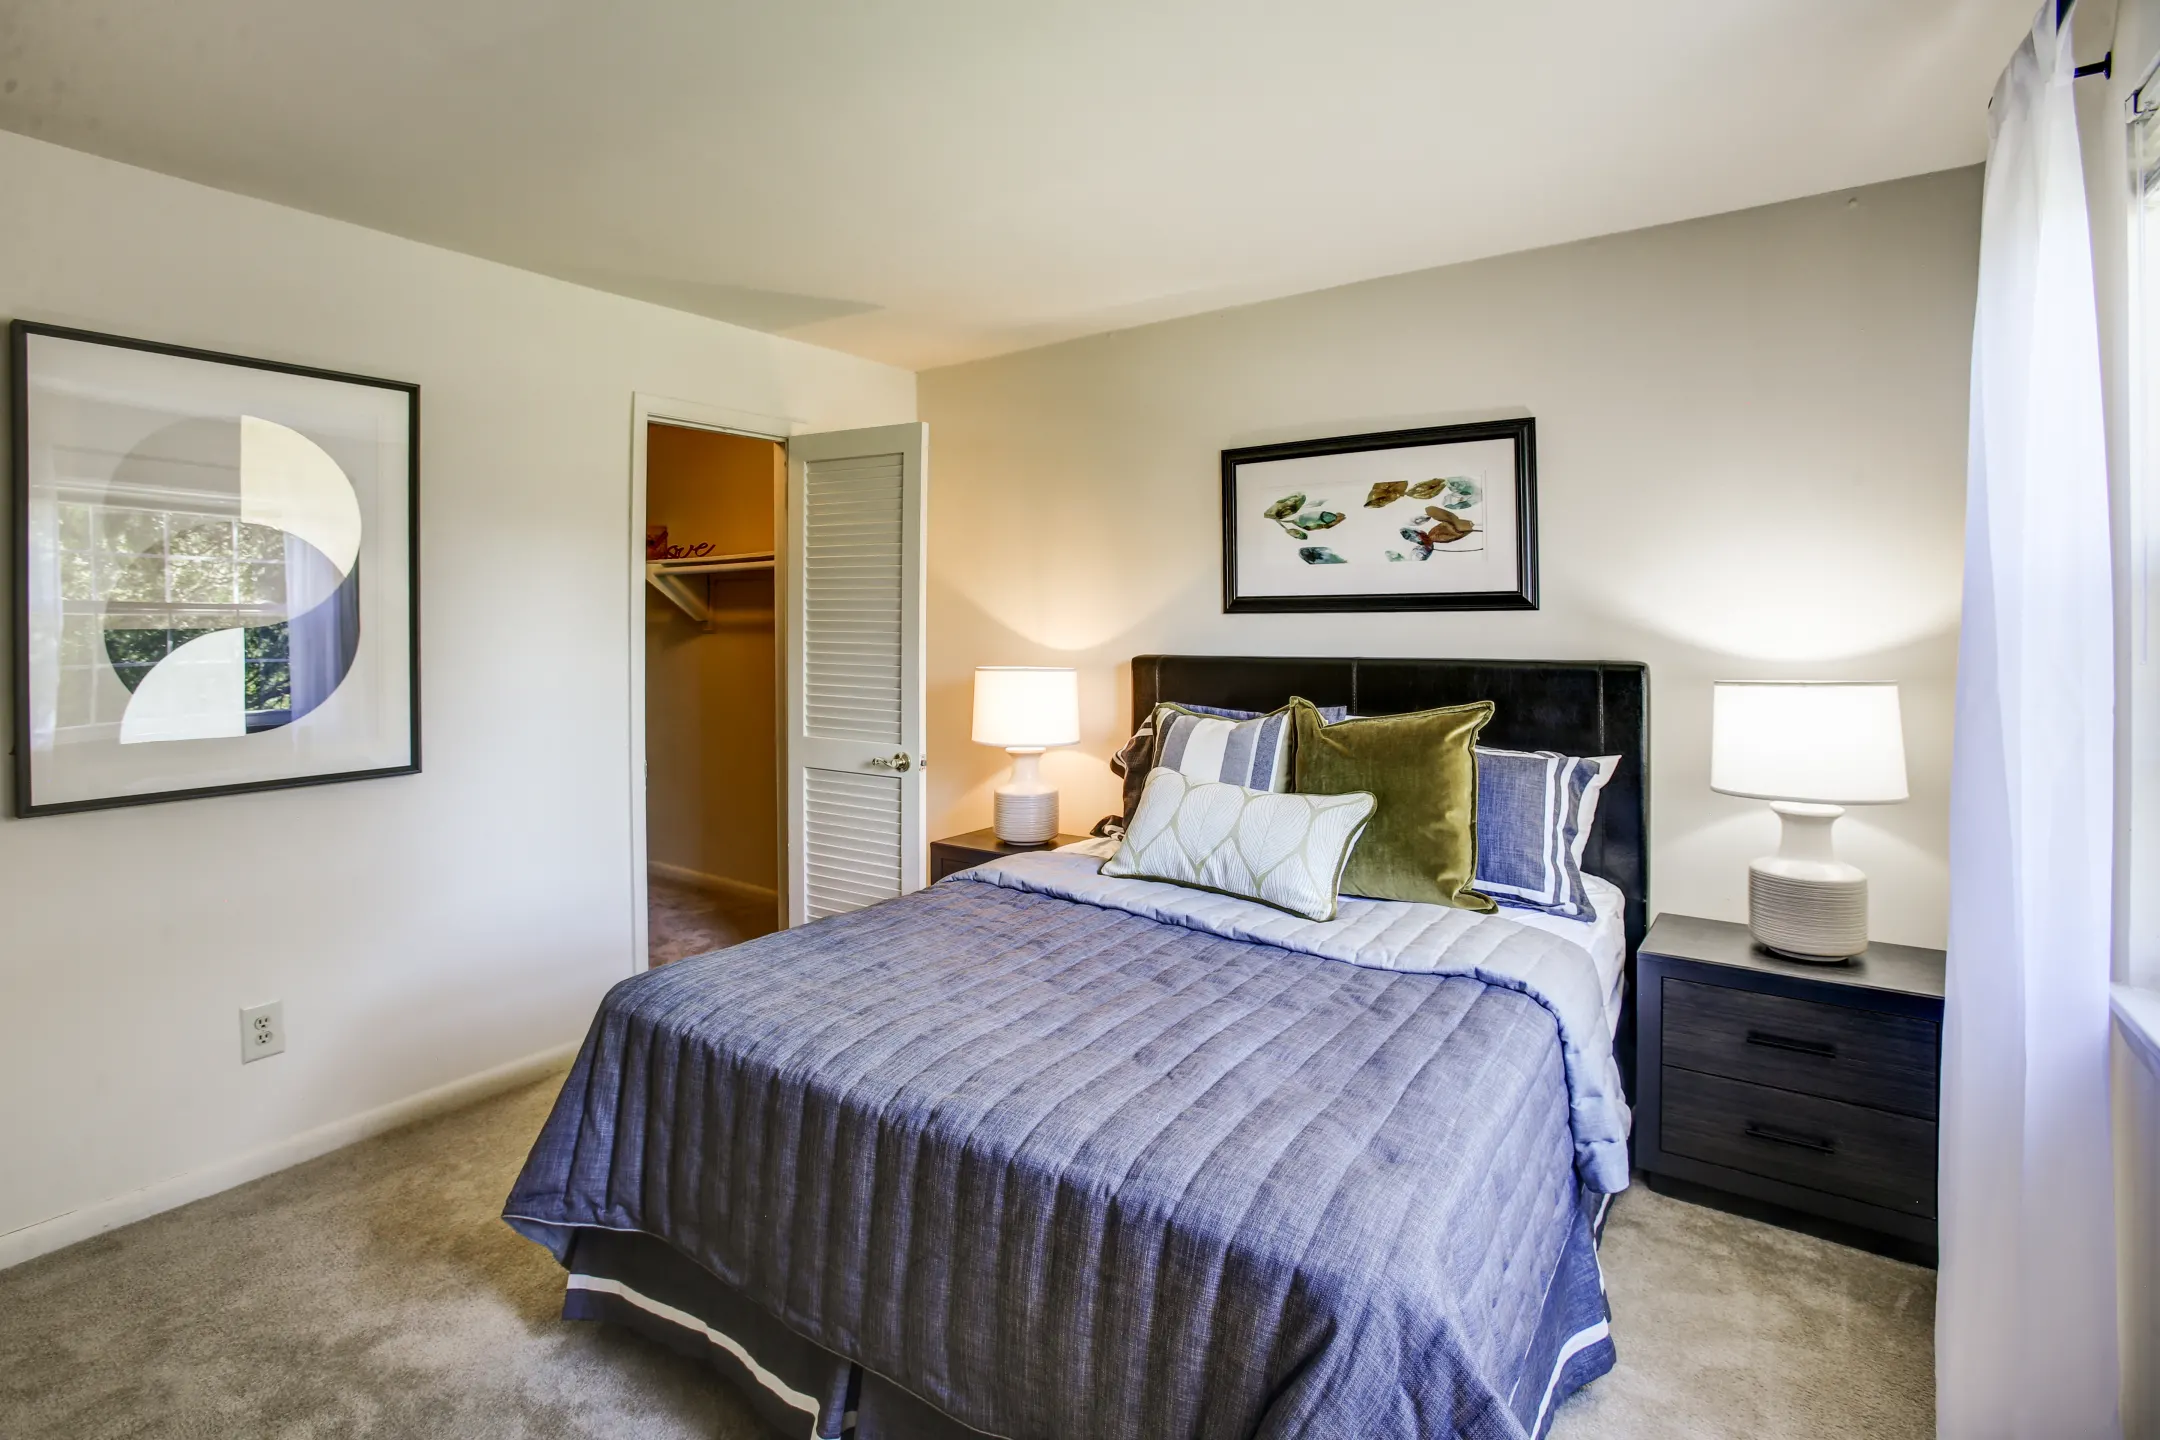 Bedroom - Dolley Madison Apartments at Tysons - McLean, VA